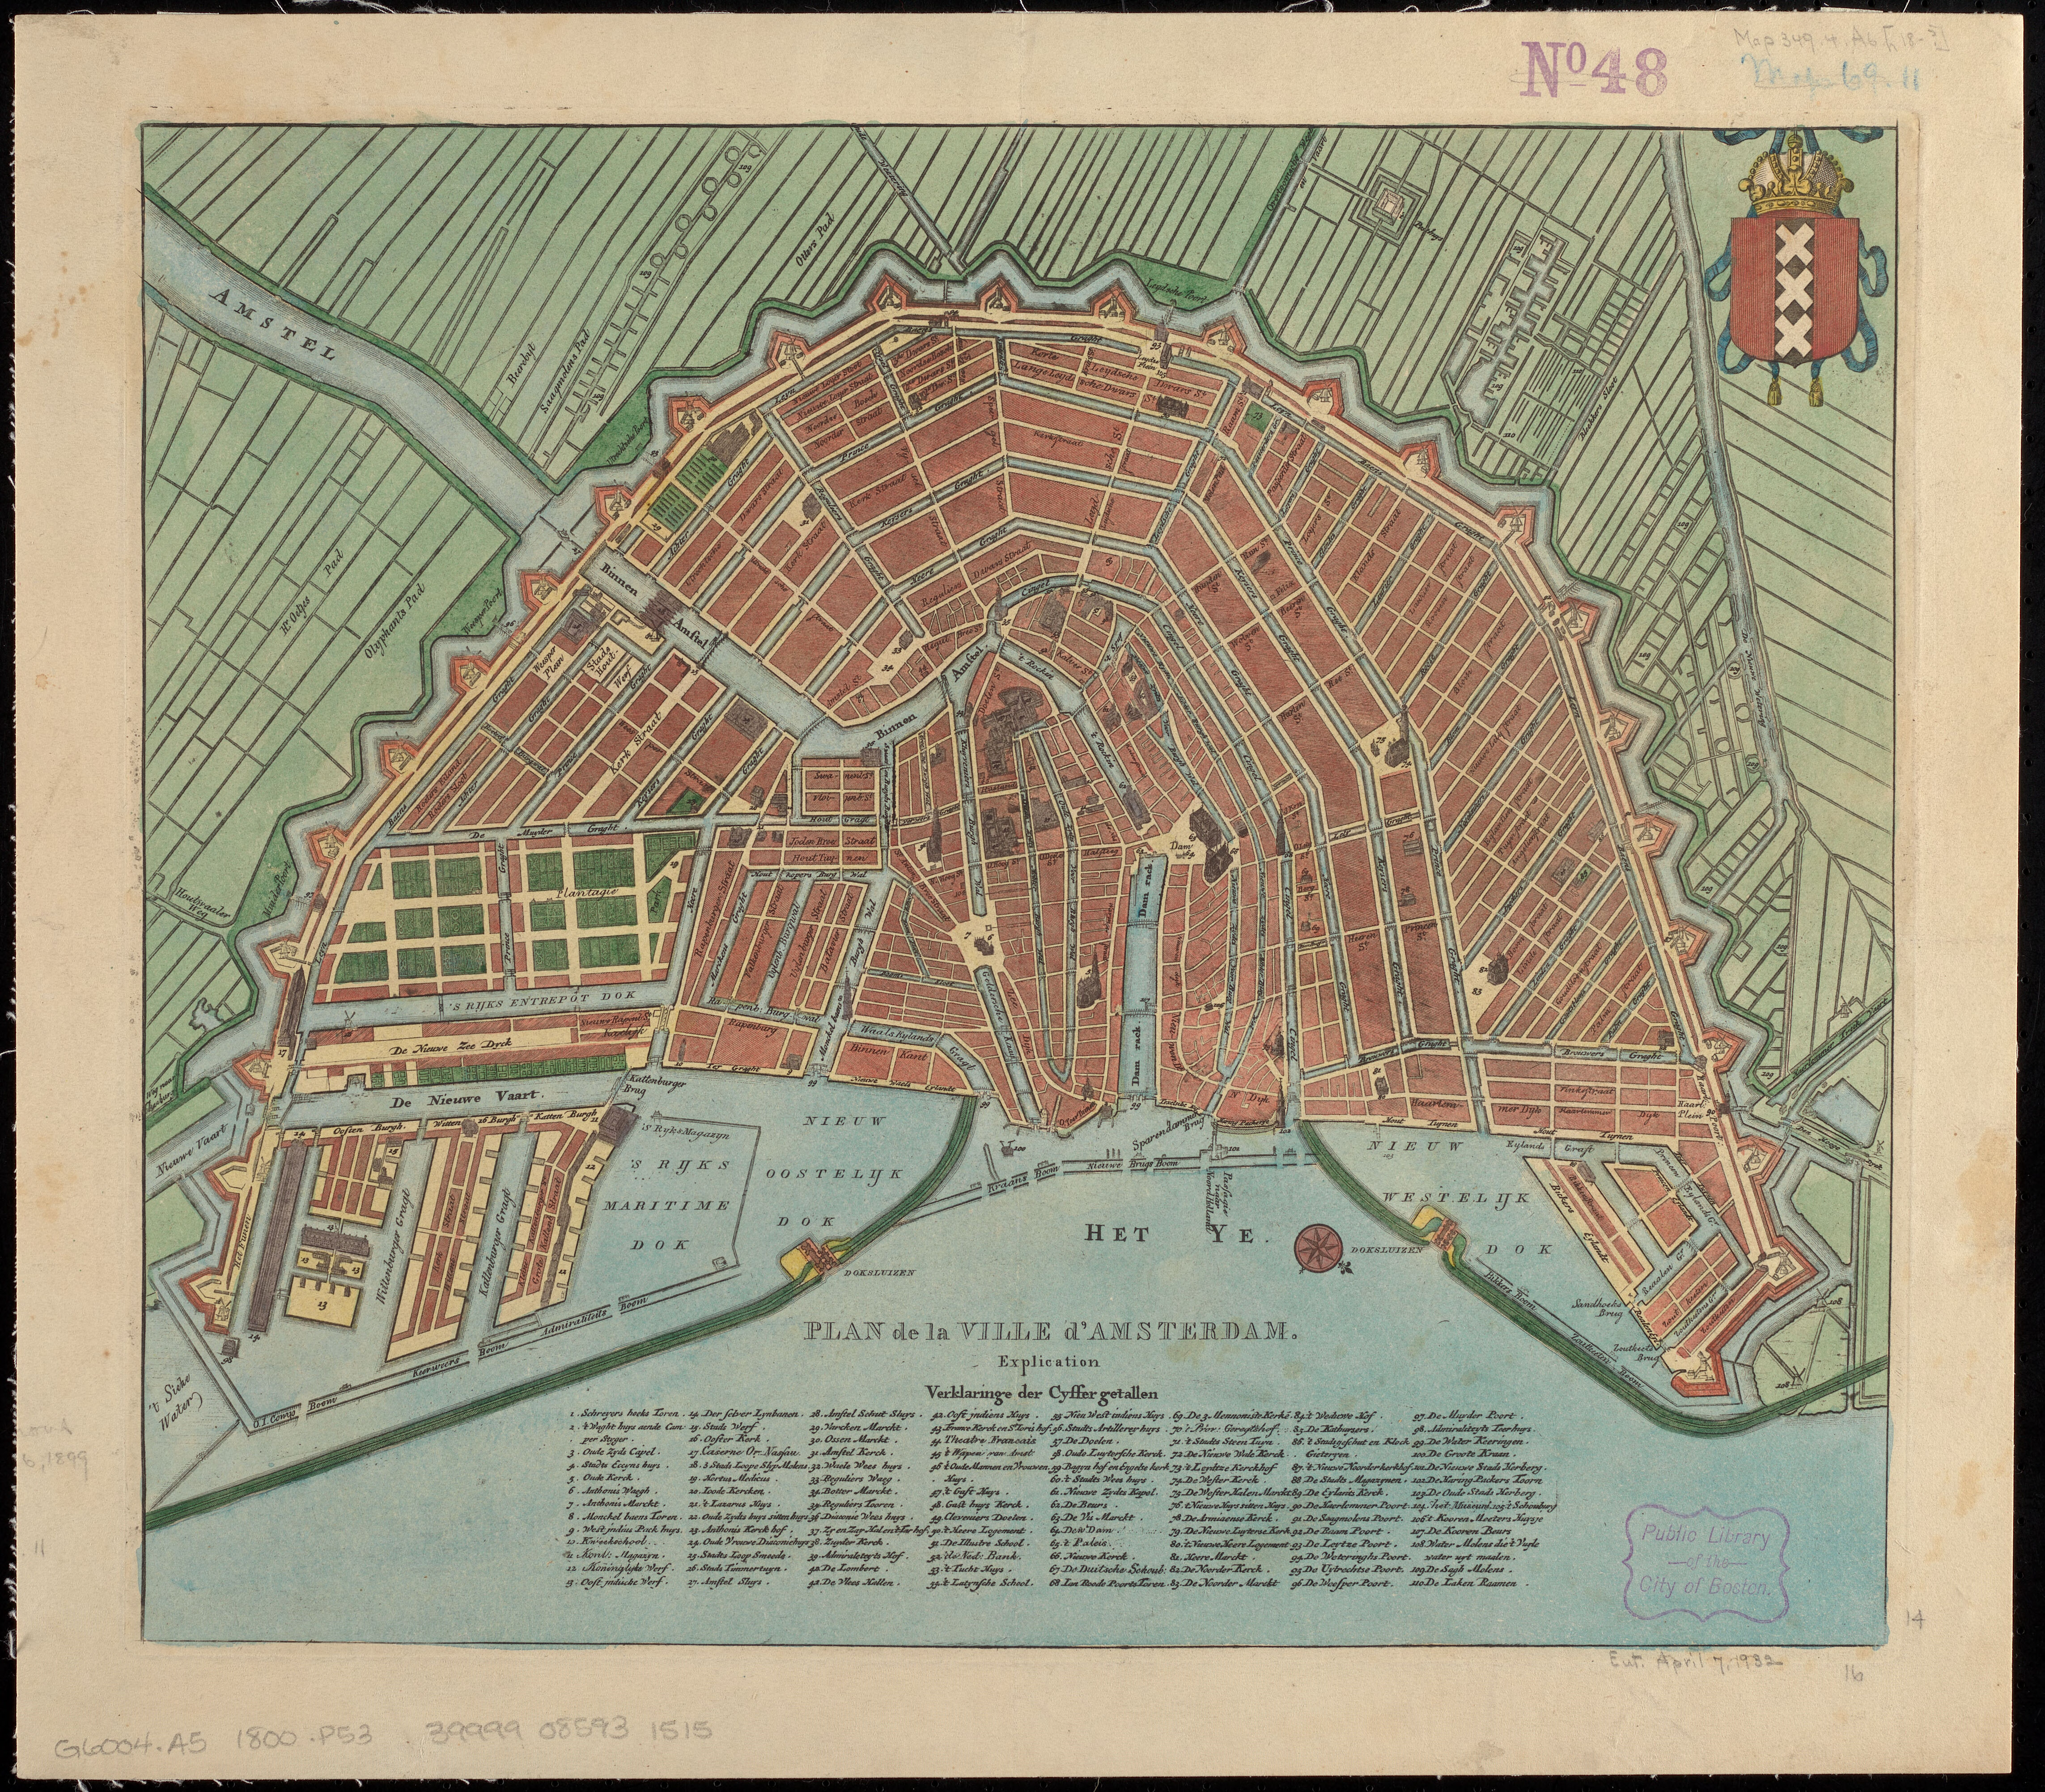 Plan de la ville d&rsquo;Amsterdam, a map of the Netherlands from LMEC collections